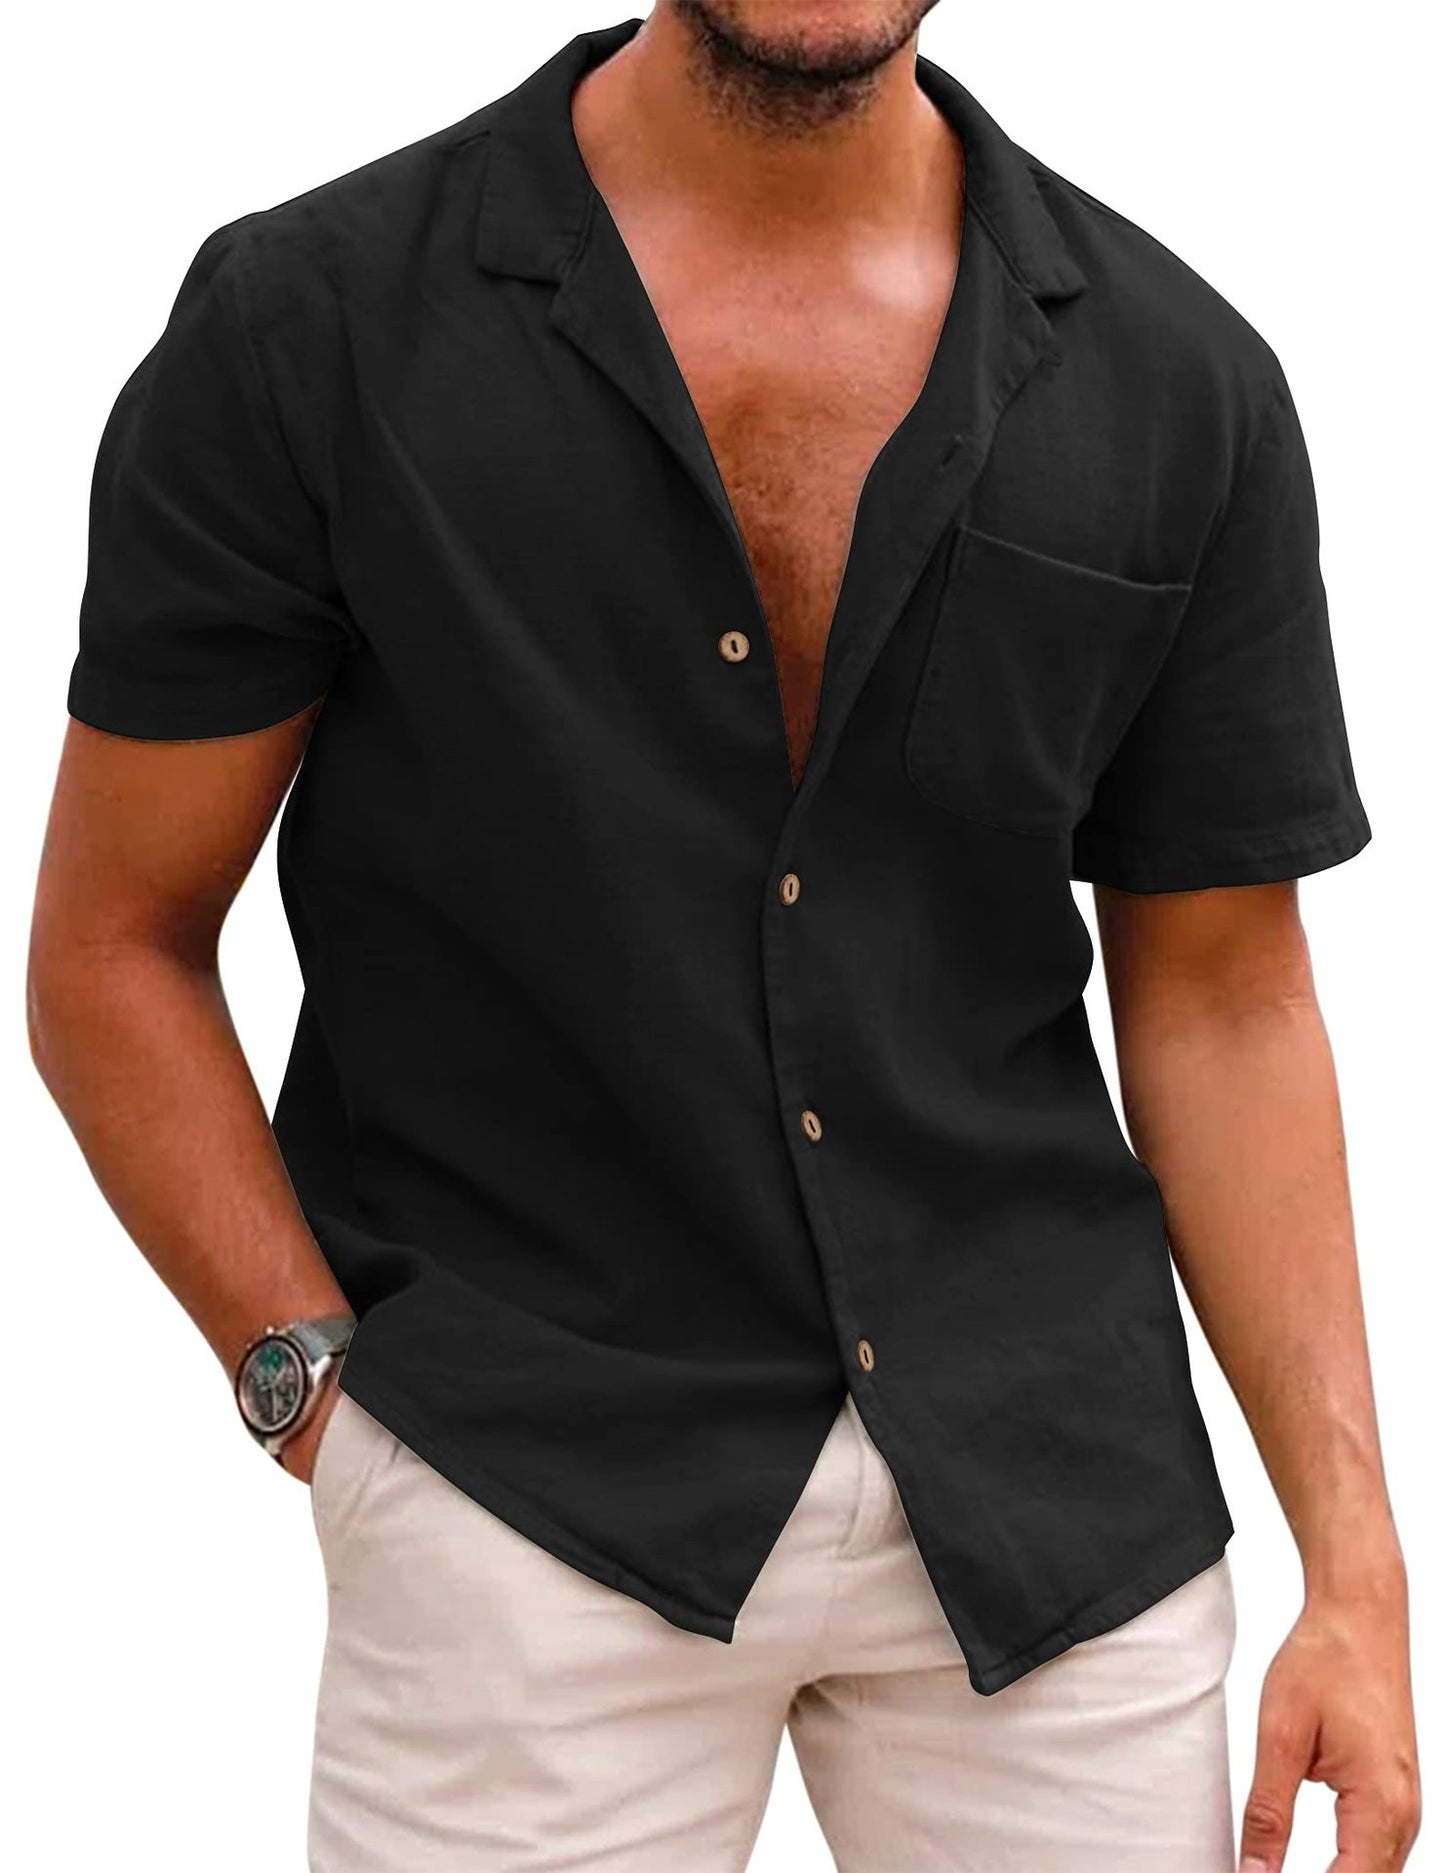 Casual Linen Short Sleeves Shirts for Men